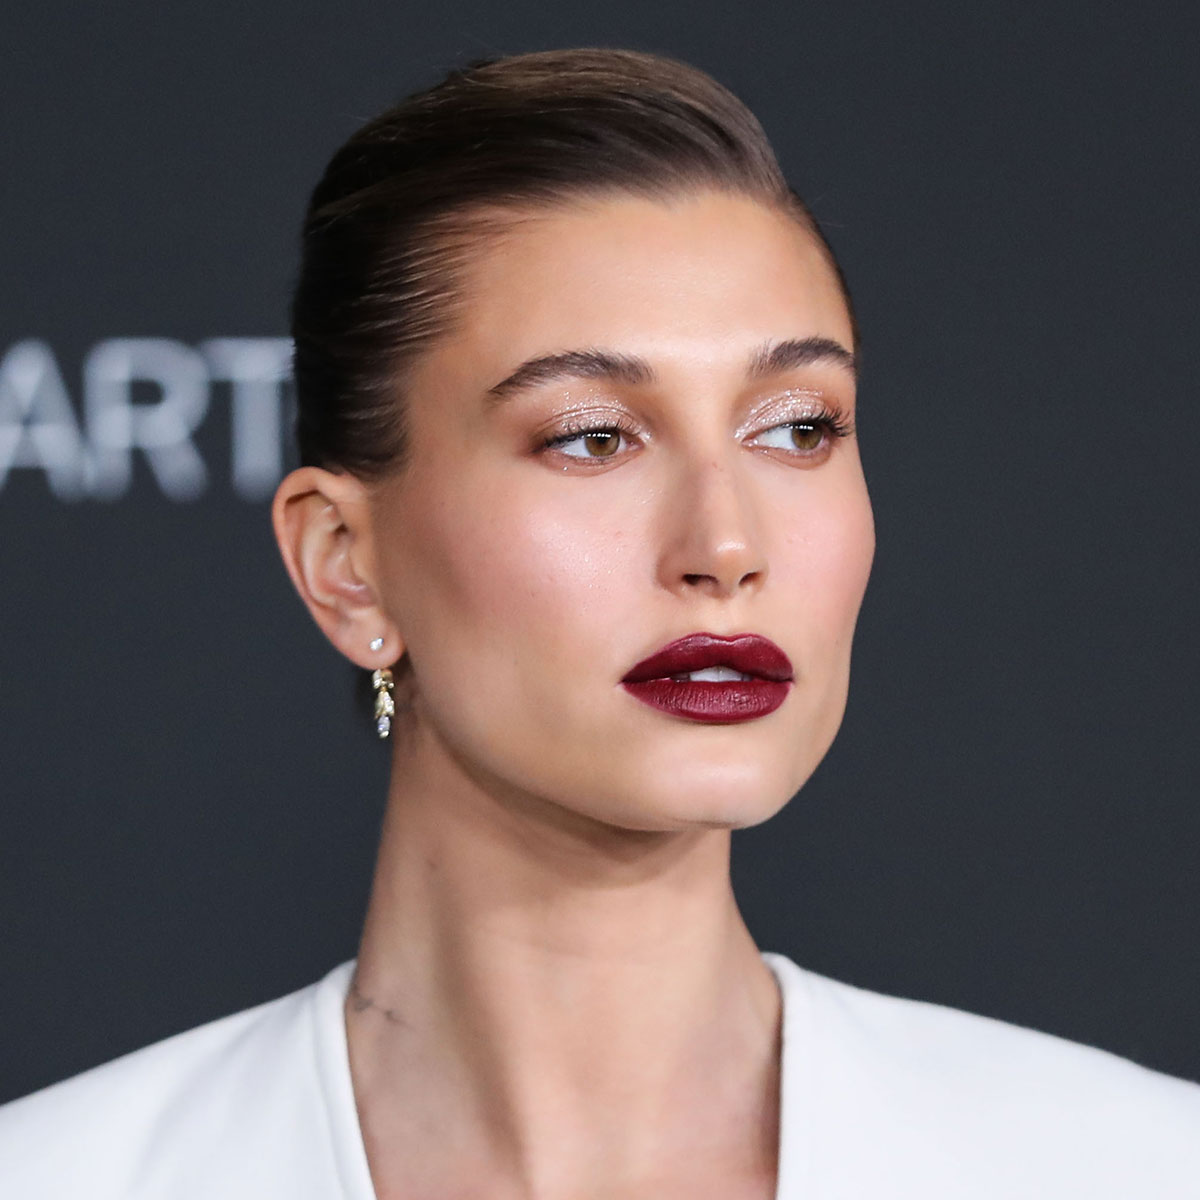 How to Achieve Hailey Bieber's Strawberry Girl Makeup Look